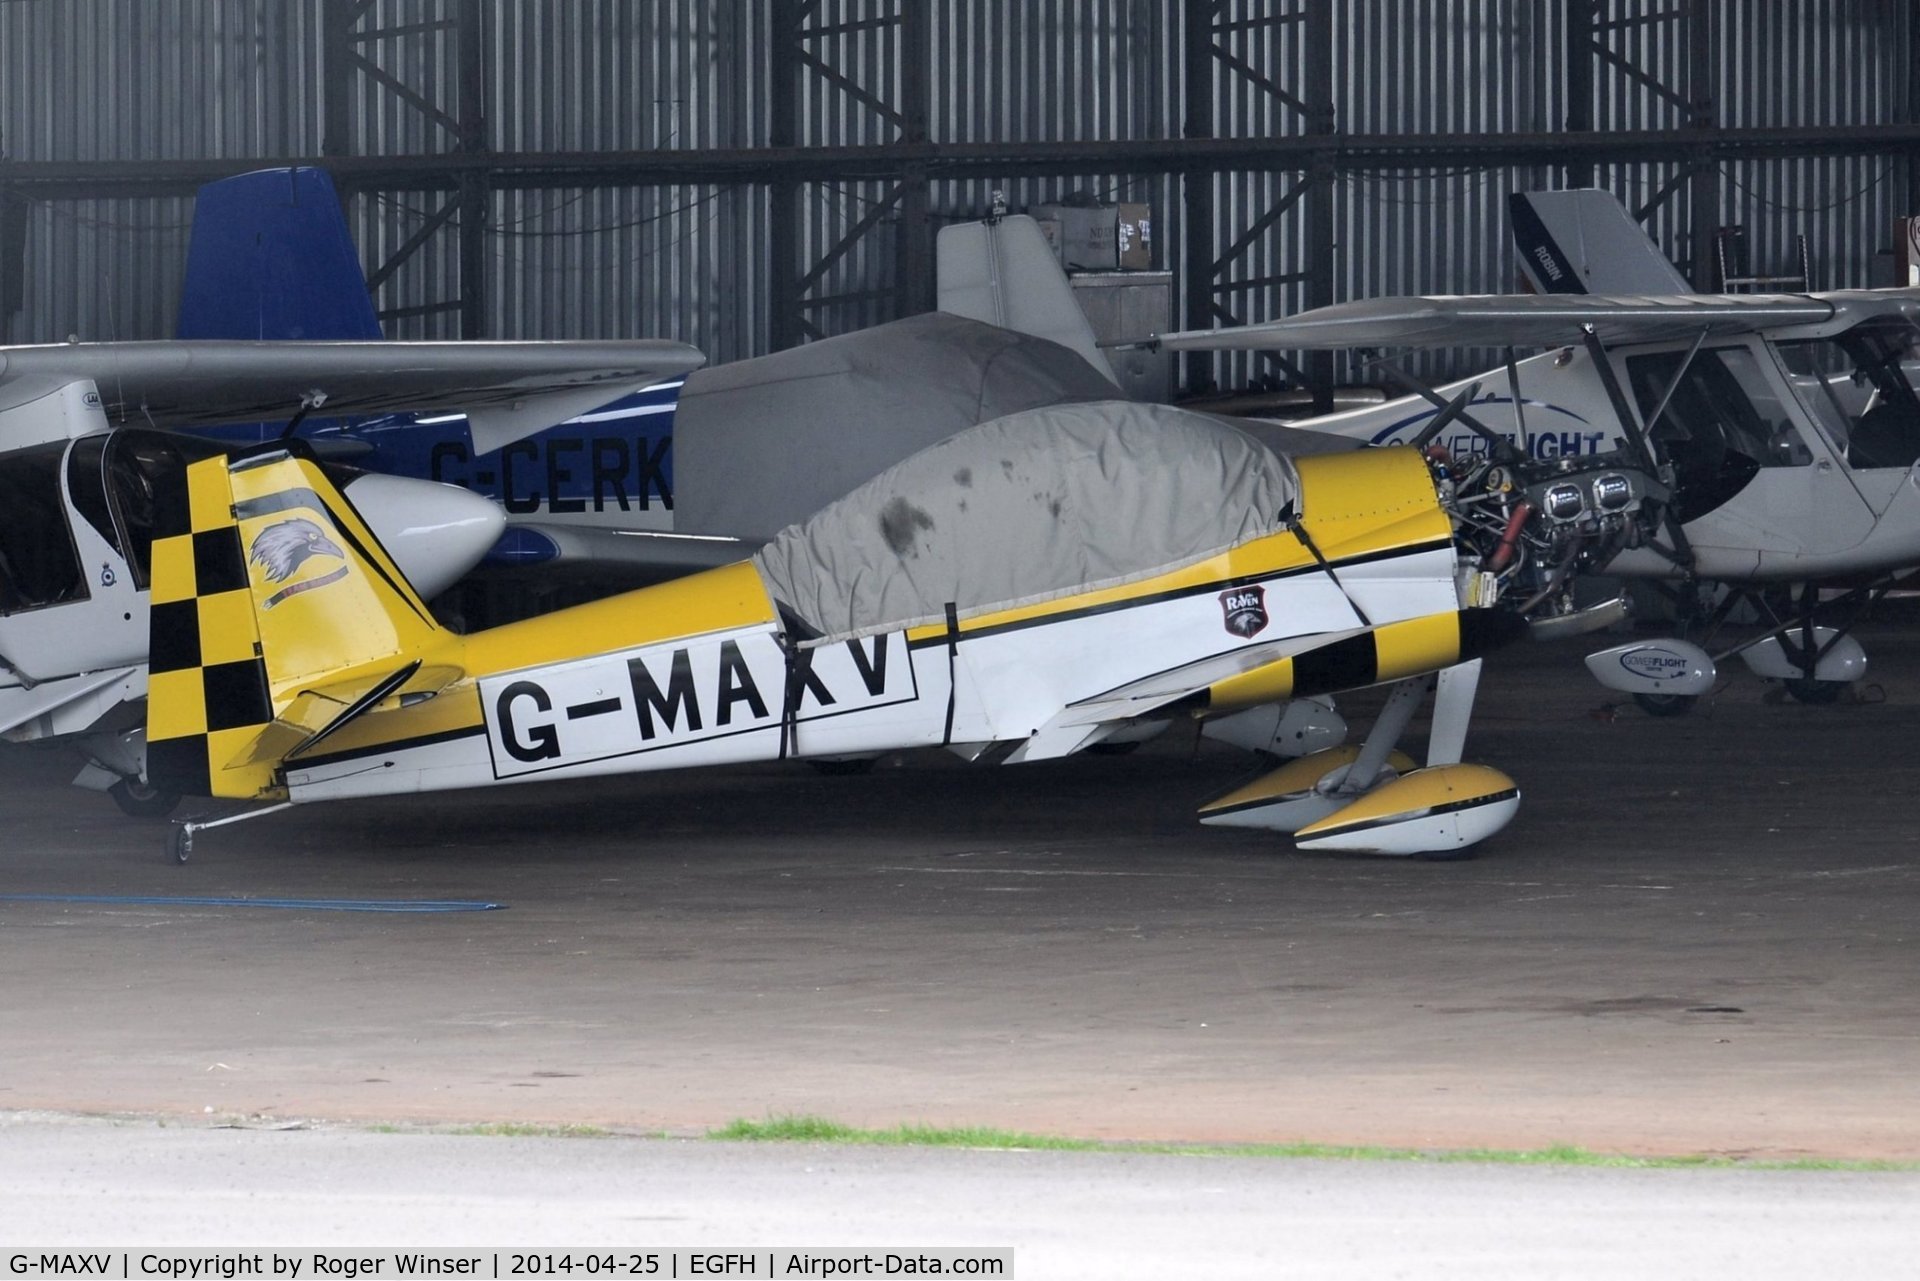 G-MAXV, 2000 Vans RV-4 C/N PFA 181-13266, Resident RV-4 having interim Team Raven markings added.G-MAXV will be the leading aircraft (Raven 1) of the recently formed 5-ship formation aerobatic display team.